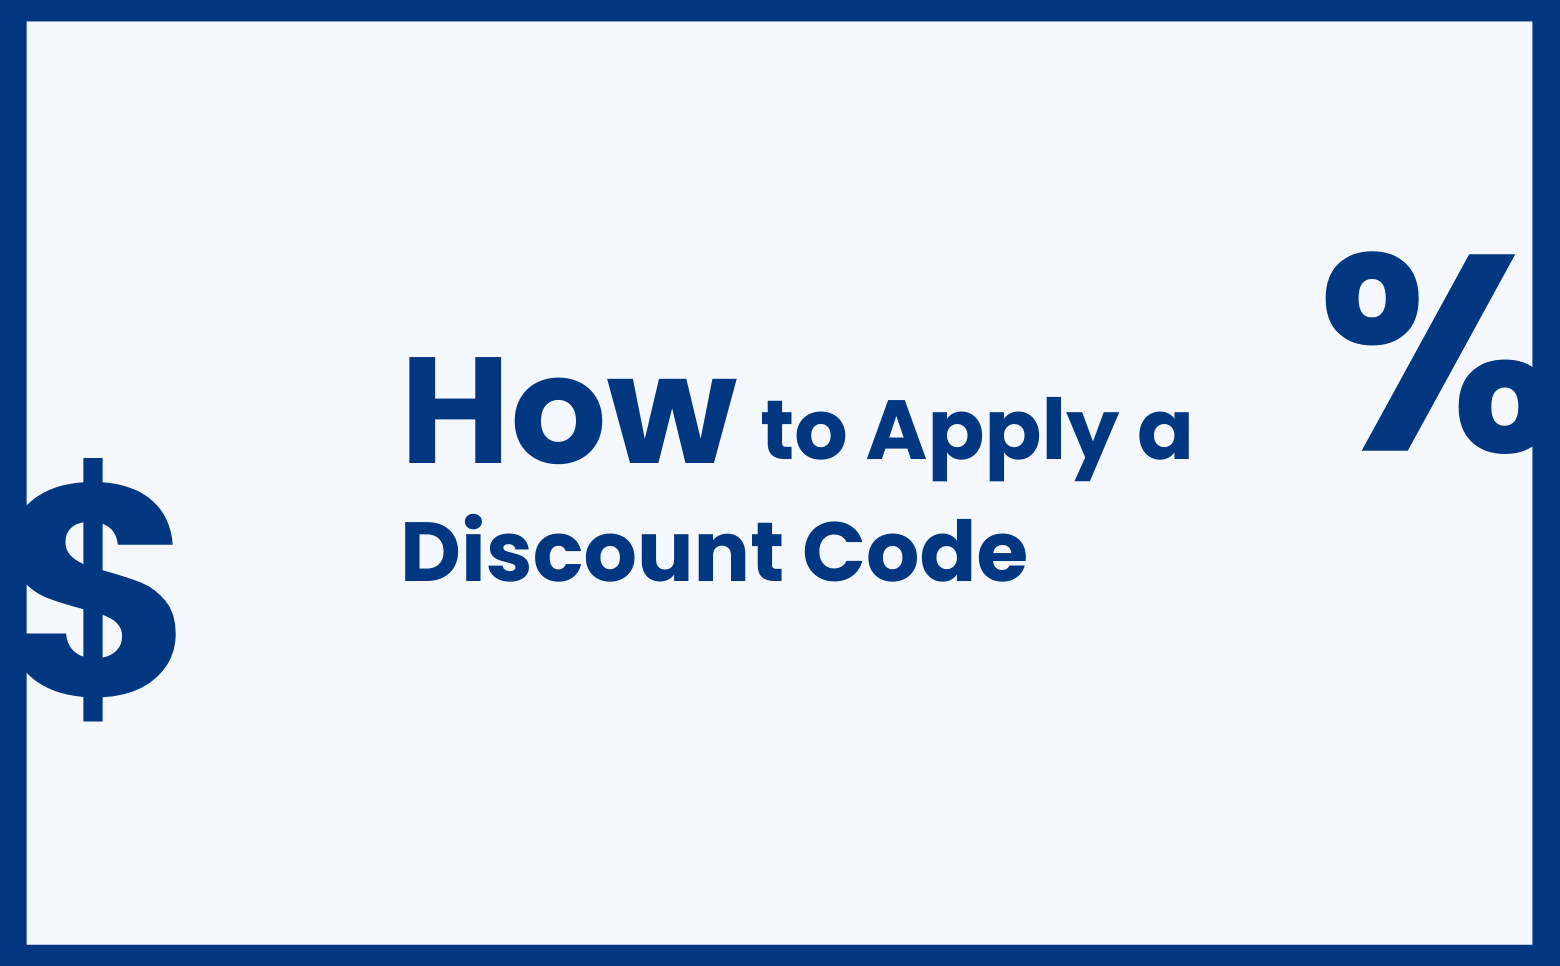 Discount Code Guide